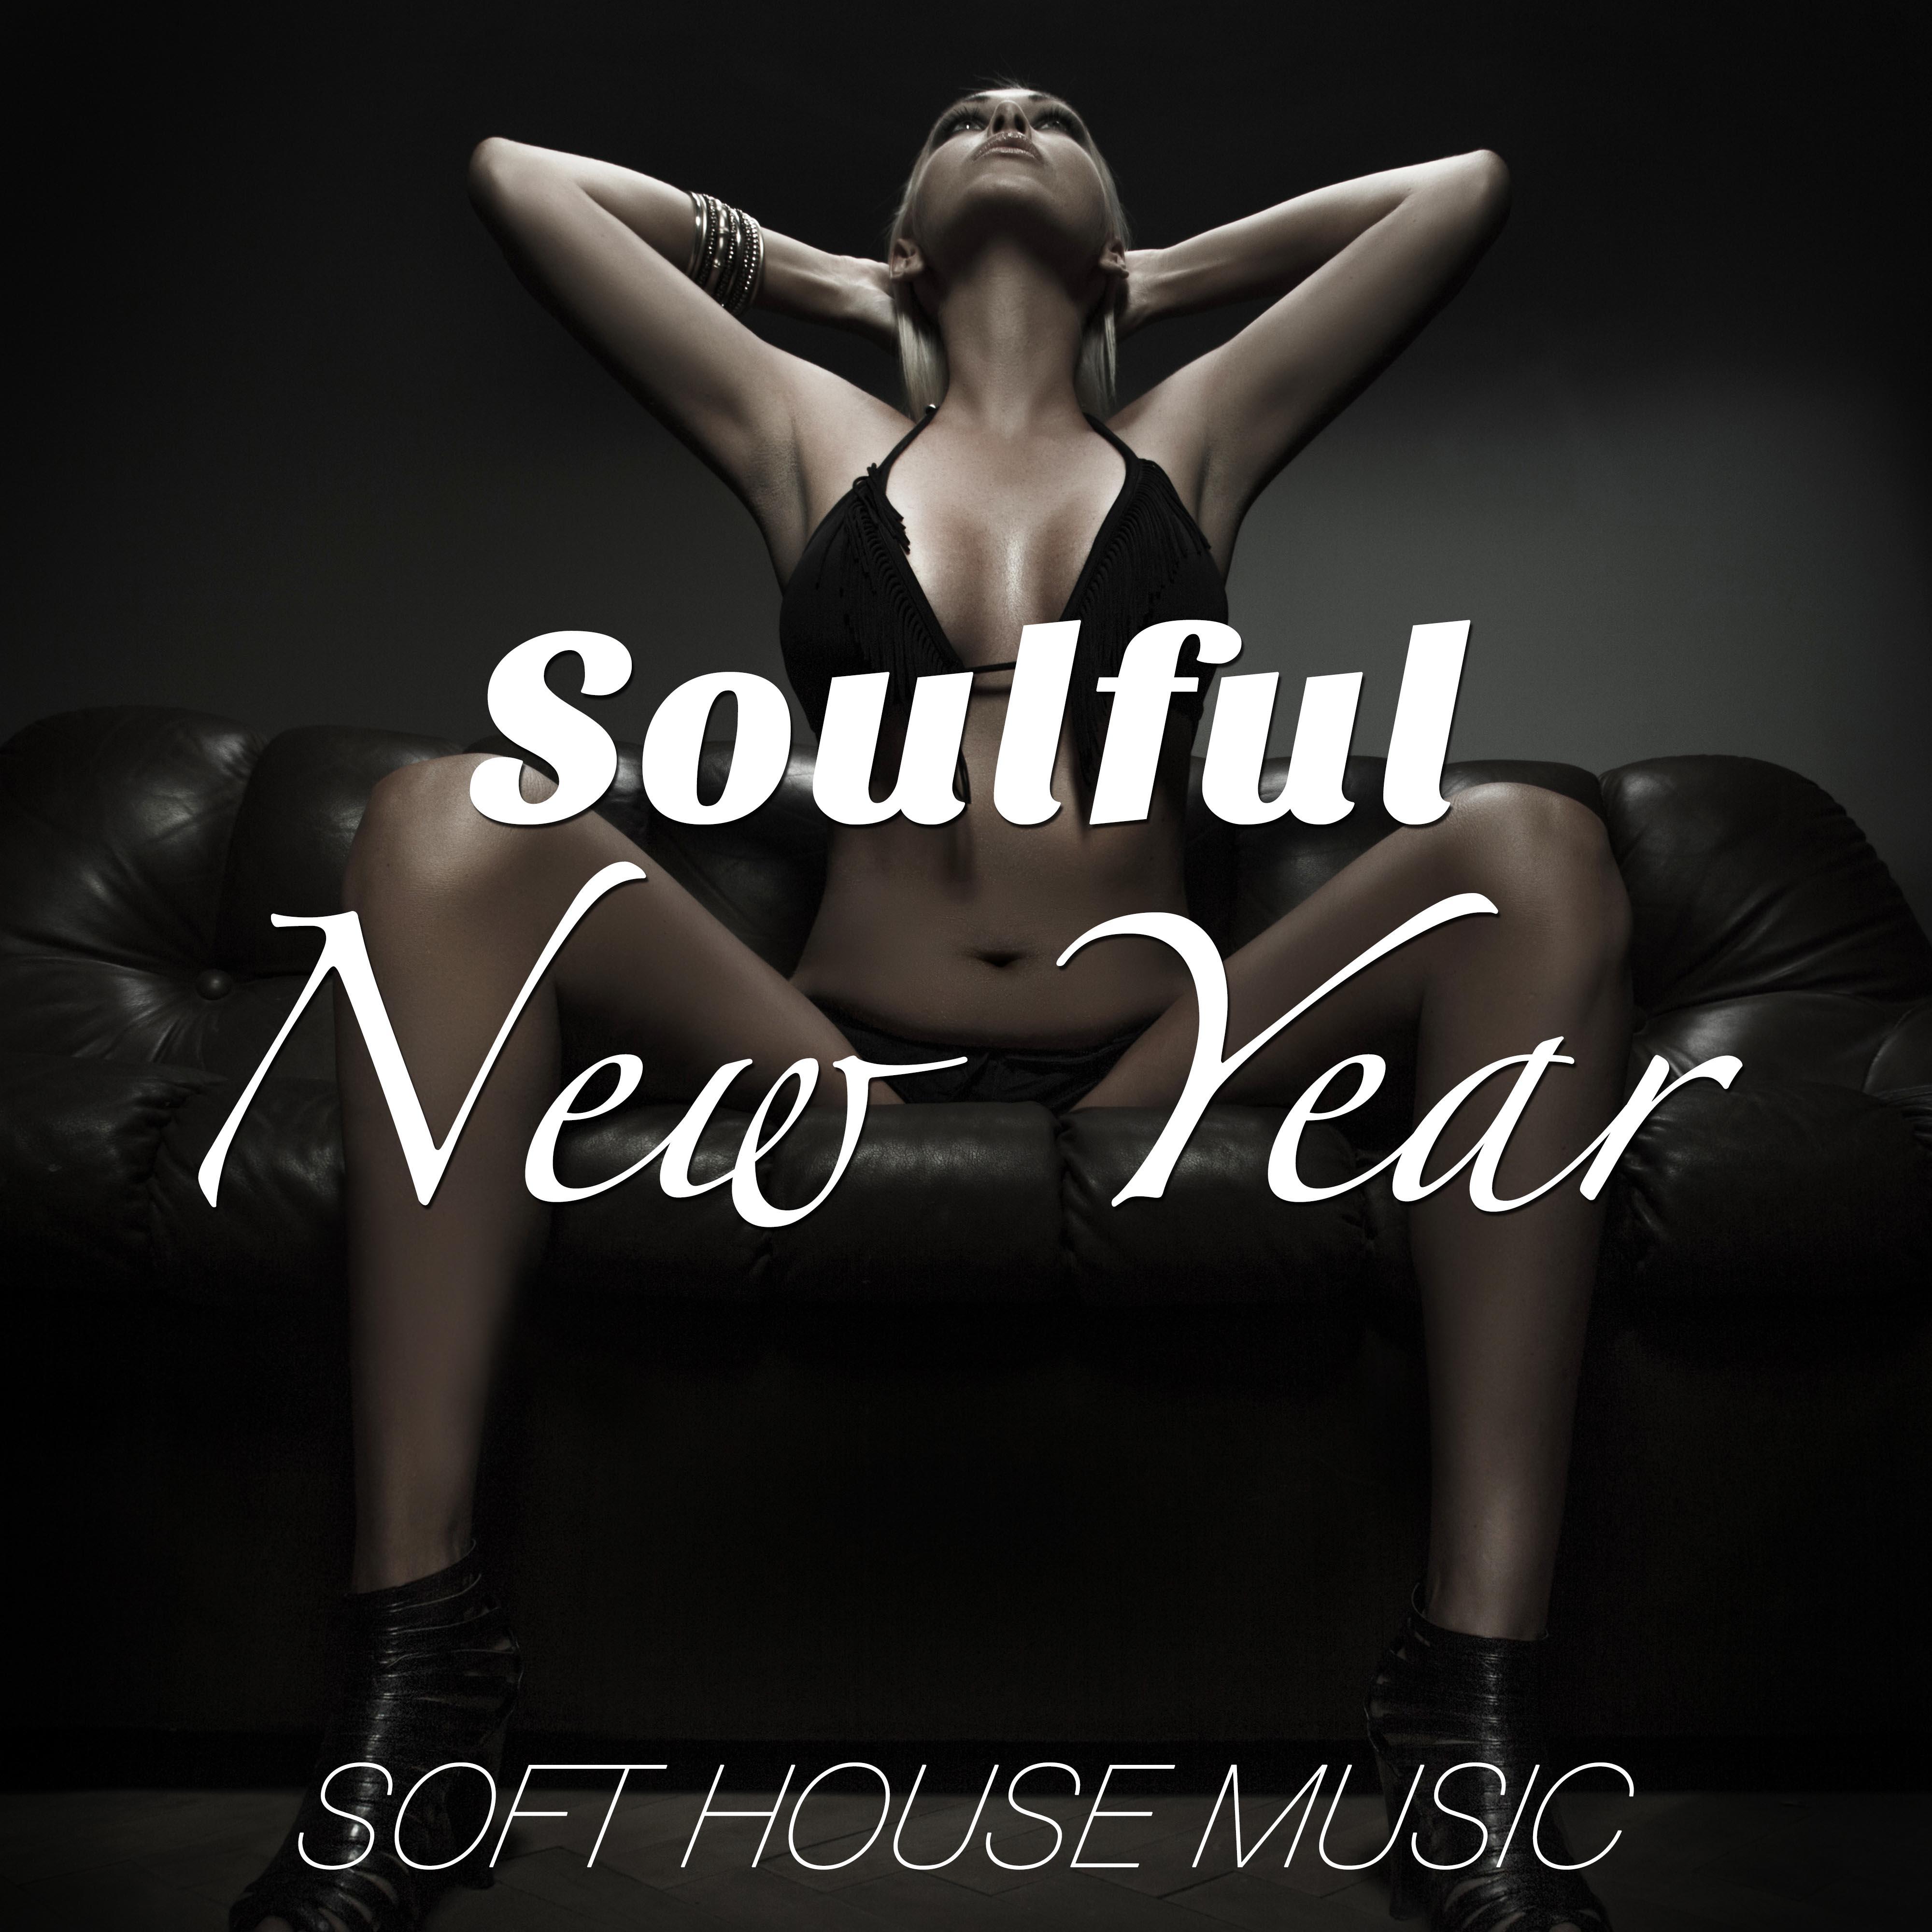 Soulful New Year: Soft House Music with Smooth Jazz Songs and Erotic Lounge Vibes for the New Year's Eve Party of your Life